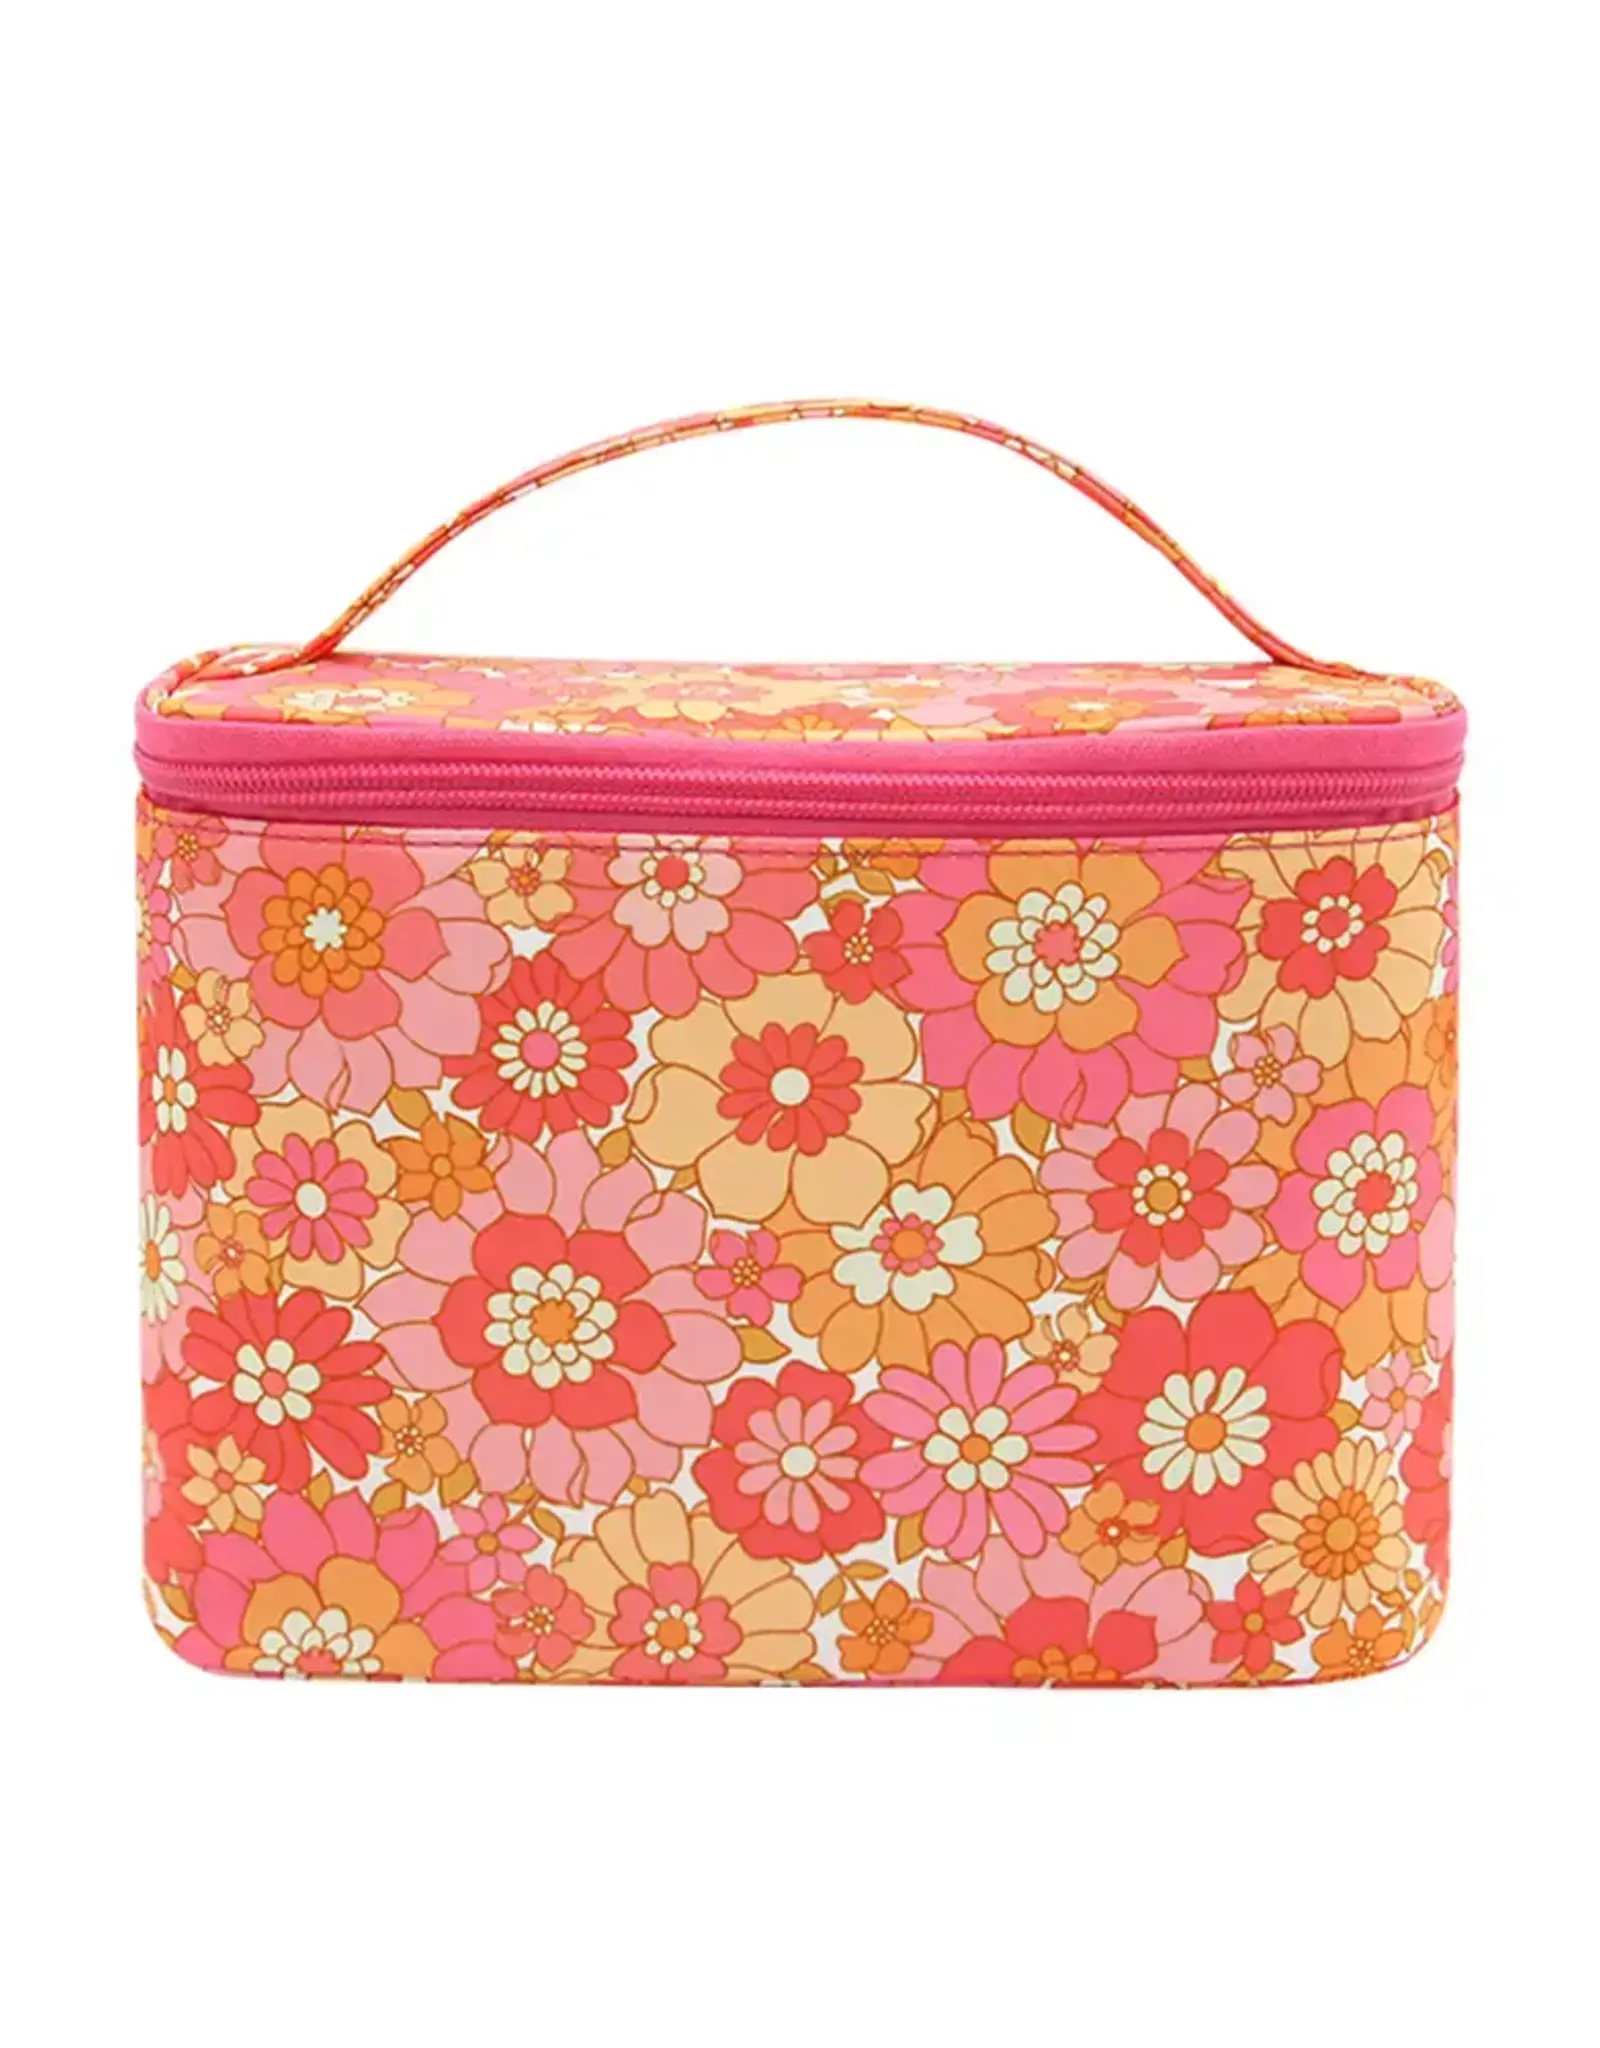 Floral Daisy Cosmetic Bag